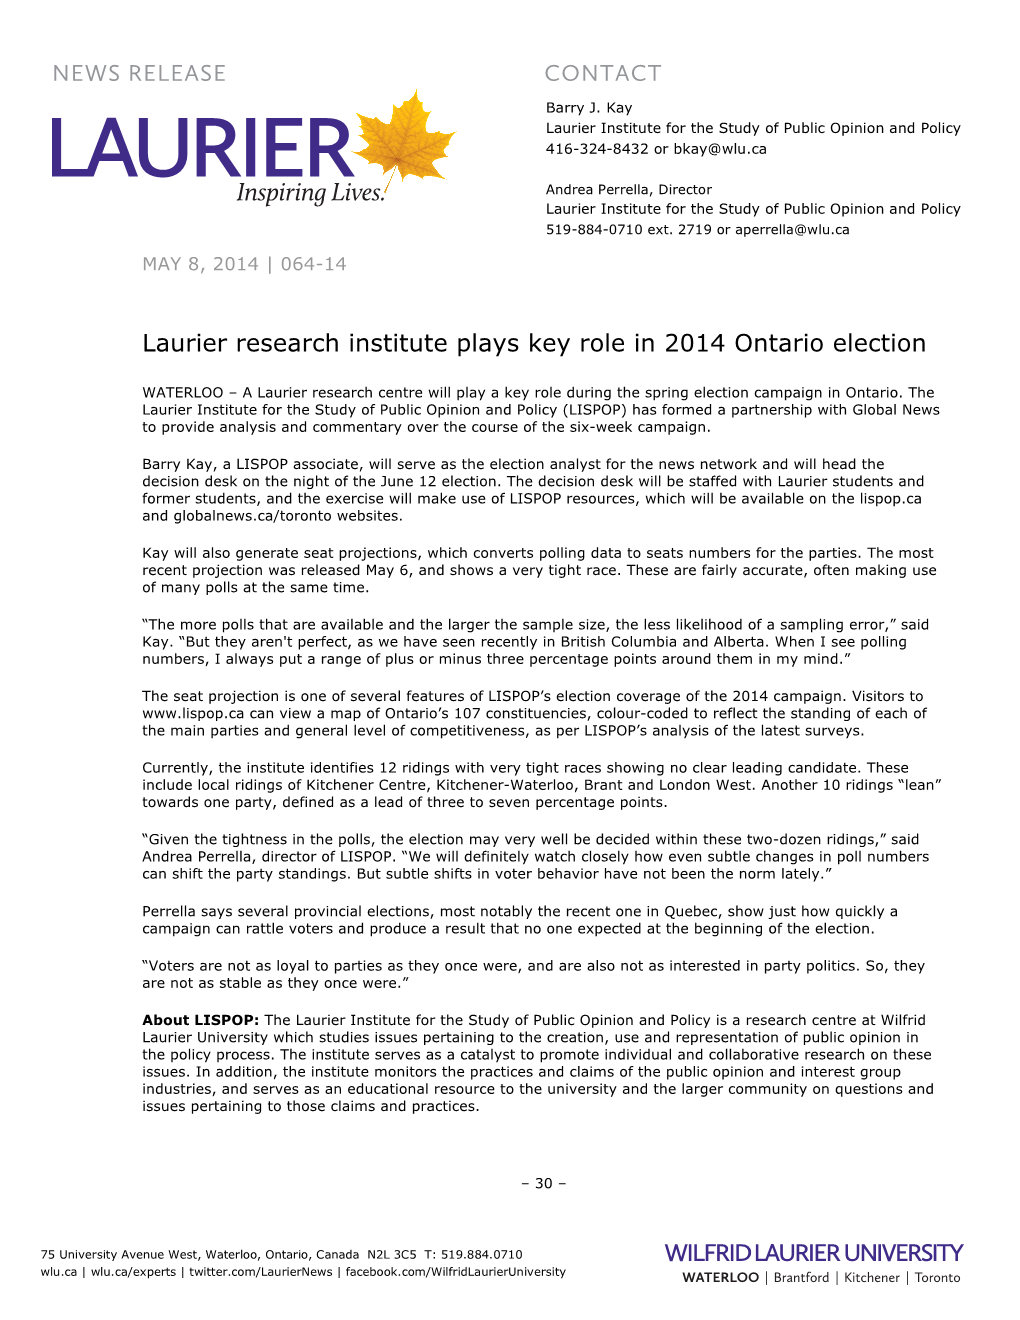 Wilfrid Laurier University Which Studies Issues Pertaining to the Creation, Use and Representation of Public Opinion in the Policy Process